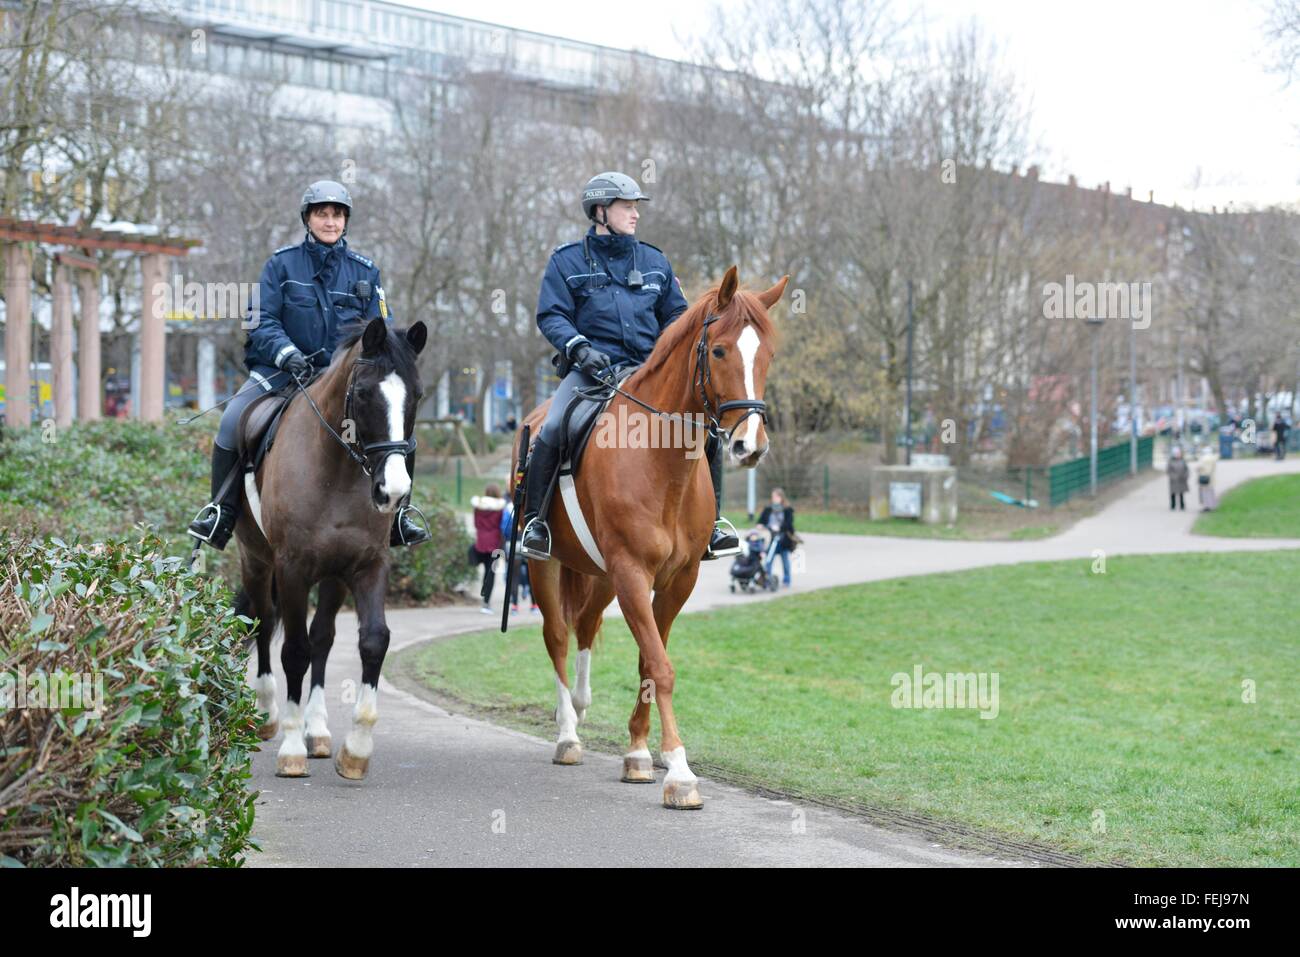 Police-officers on horses in Freiburg, Jan. 27, 2016. Stock Photo